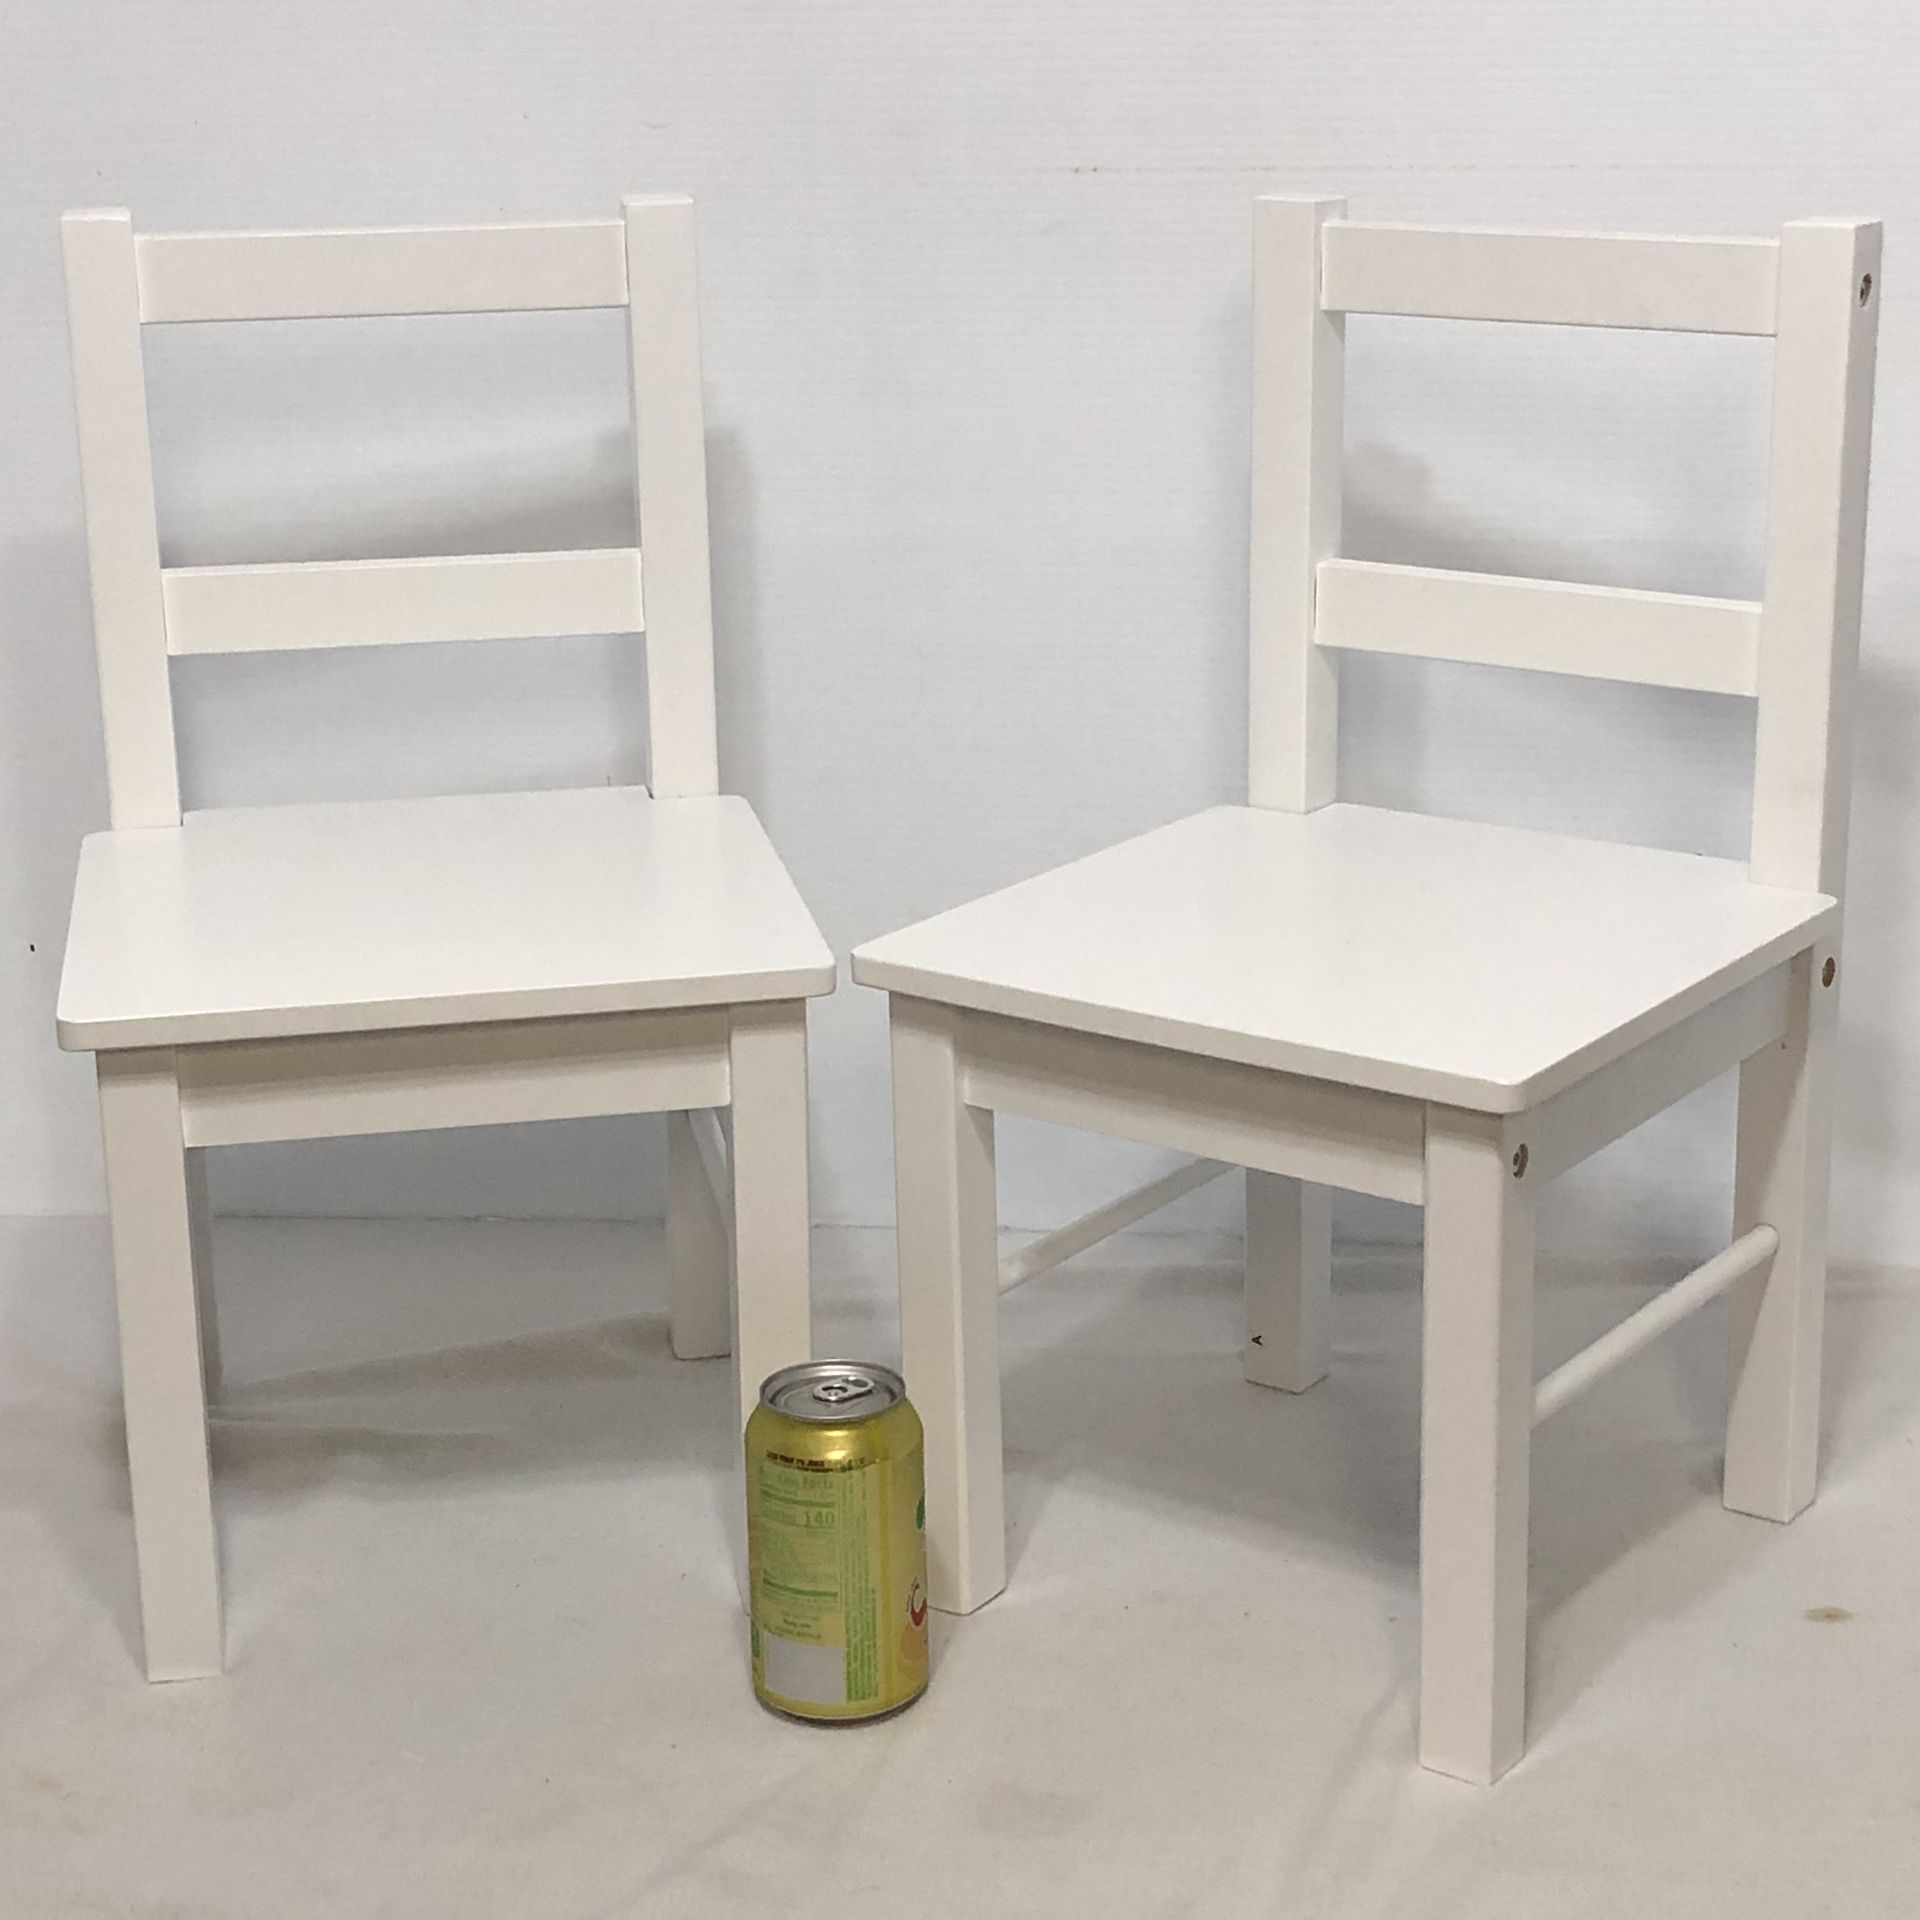 SET OF 2 CHILD’S WOODEN CHAIR - WHITE